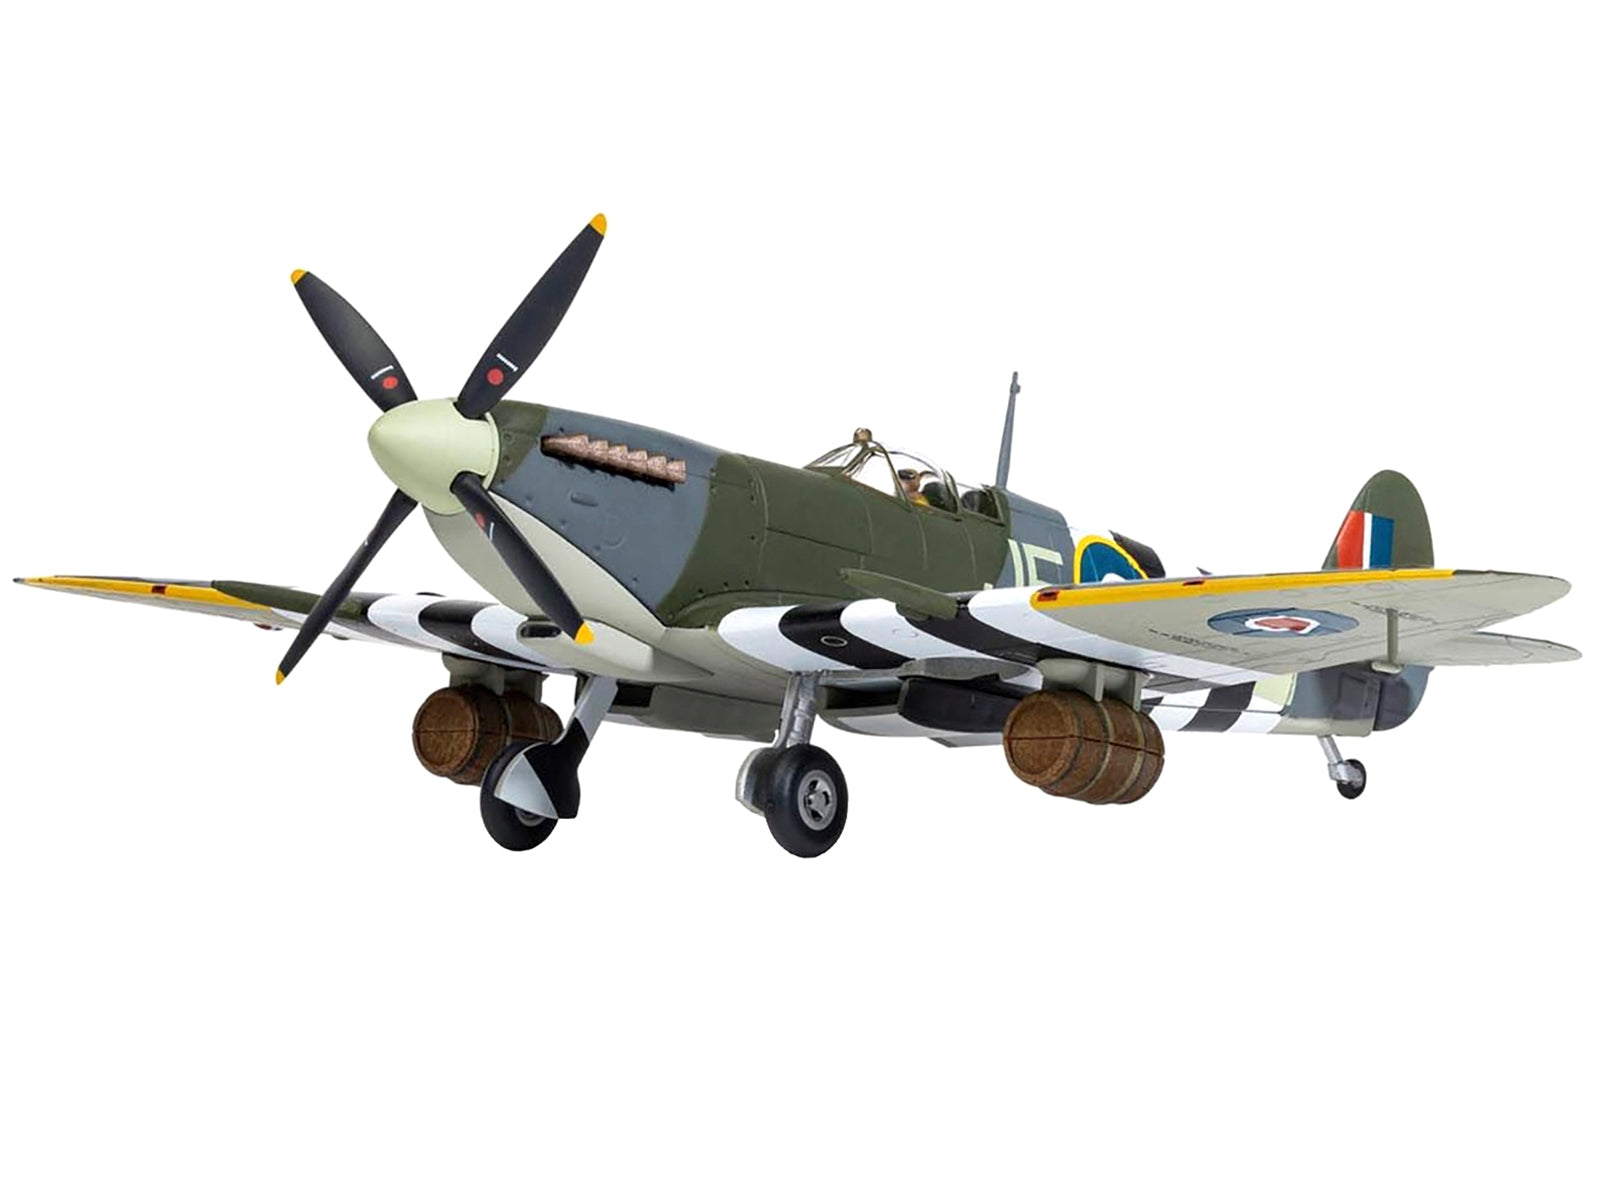 Supermarine Spitfire Mk.IX Fighter Aircraft with Commander J.E. "Johnnie" Johnson Figure 144 Wing RCAF